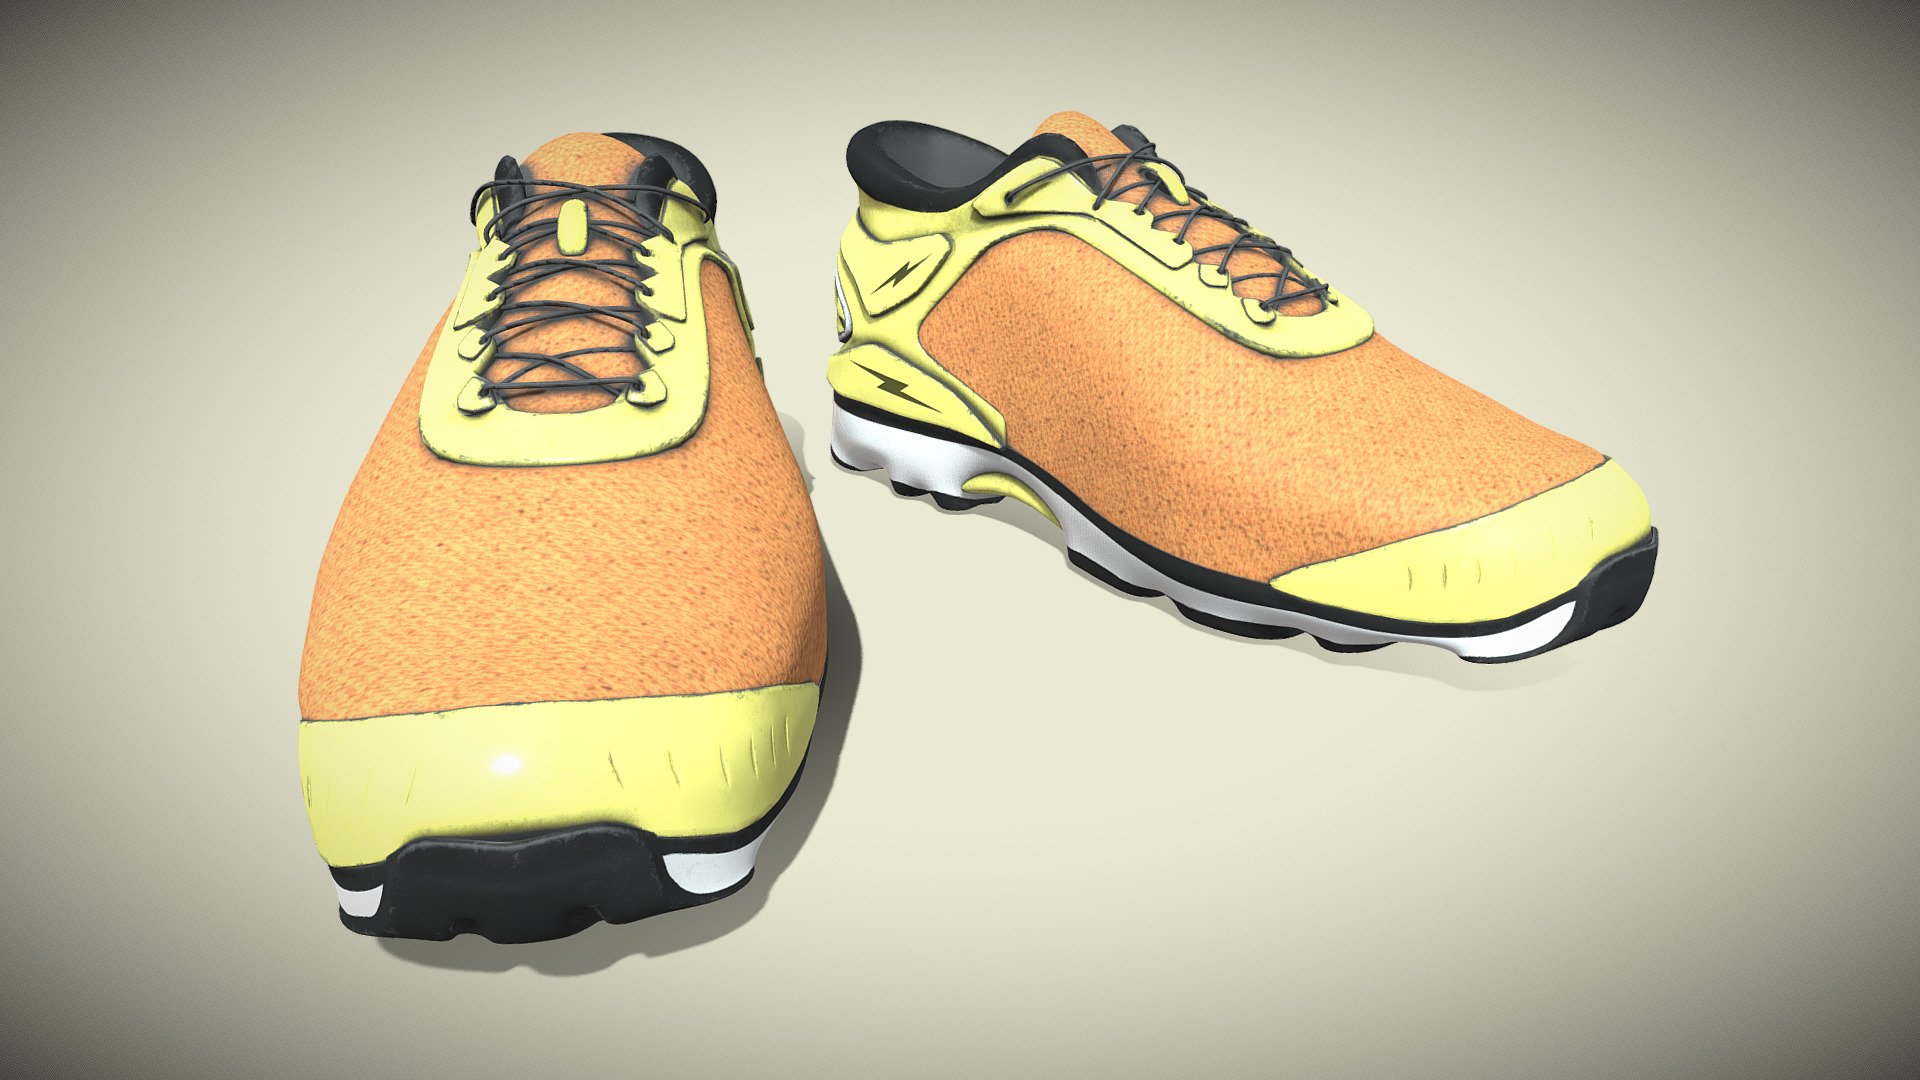 Footwear - Sports Style
Amazing Footwear!
UV Unwrapped and textured. 
Comes with textures at 4096x4096 resolution. 

A single boot model contains 9 objects, 1 set of materials, and 1 set of textures per single boot.
Modeled in Blender, painted in Substance Painter. 

Blend file before modifiers has 5.642 Faces, and 6.152 Vertices per two boots together.

Video Preview: https://youtu.be/datduuwotos
.
My Gallery: https://edjan3d.wixsite.com/my-site - Footwear - Sports Style - Download Free 3D model by Ed.Jan 3d model